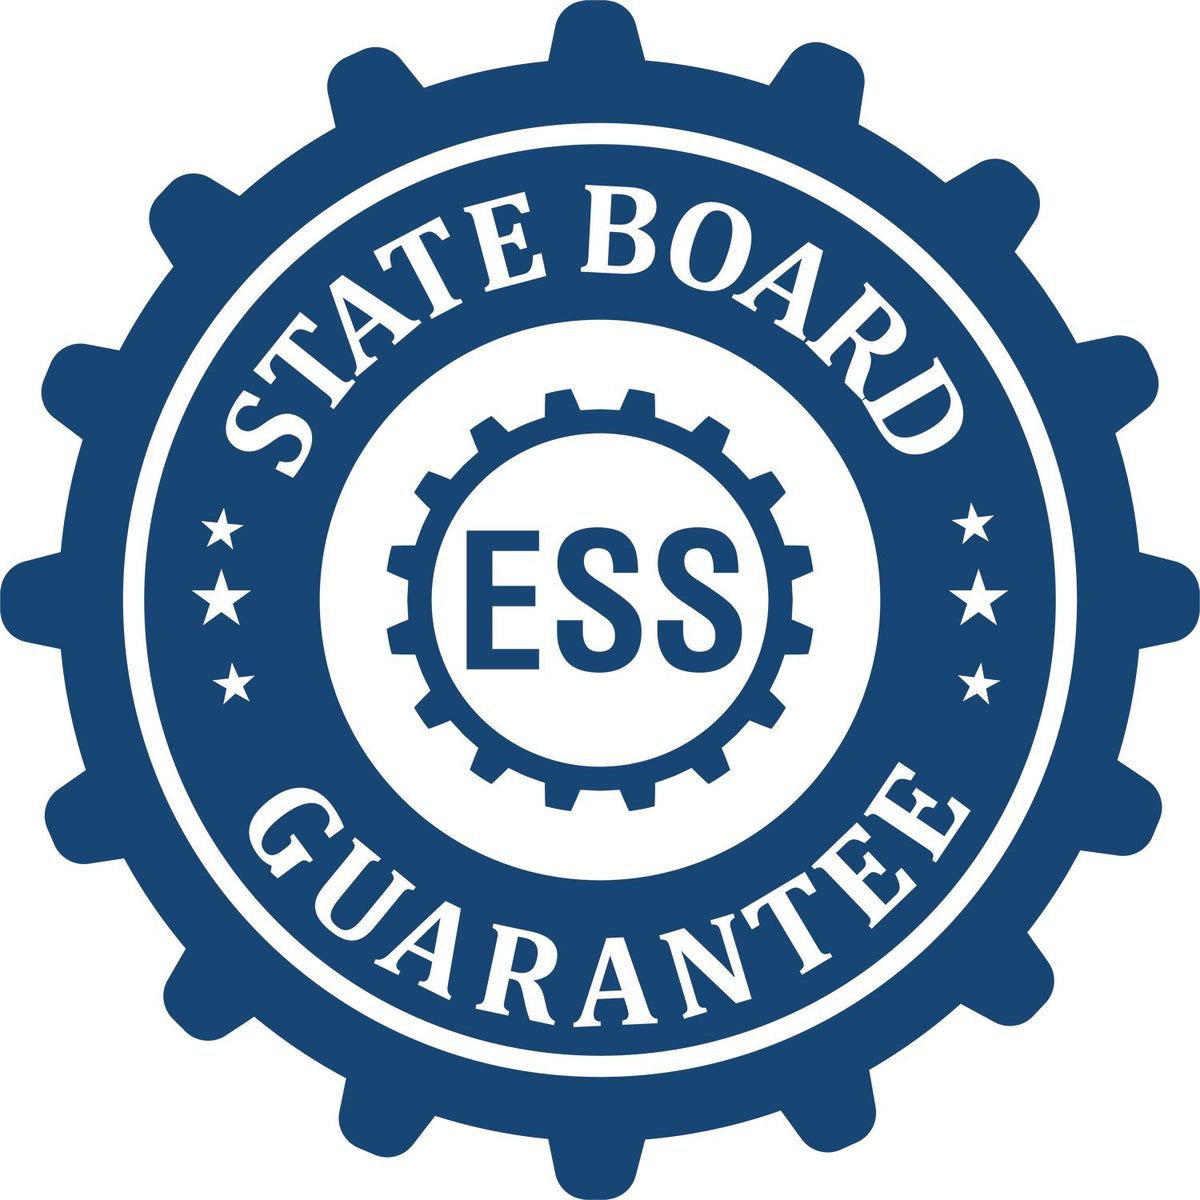 An emblem in a gear shape illustrating a state board guarantee for the Digital Connecticut Geologist Stamp, Electronic Seal for Connecticut Geologist